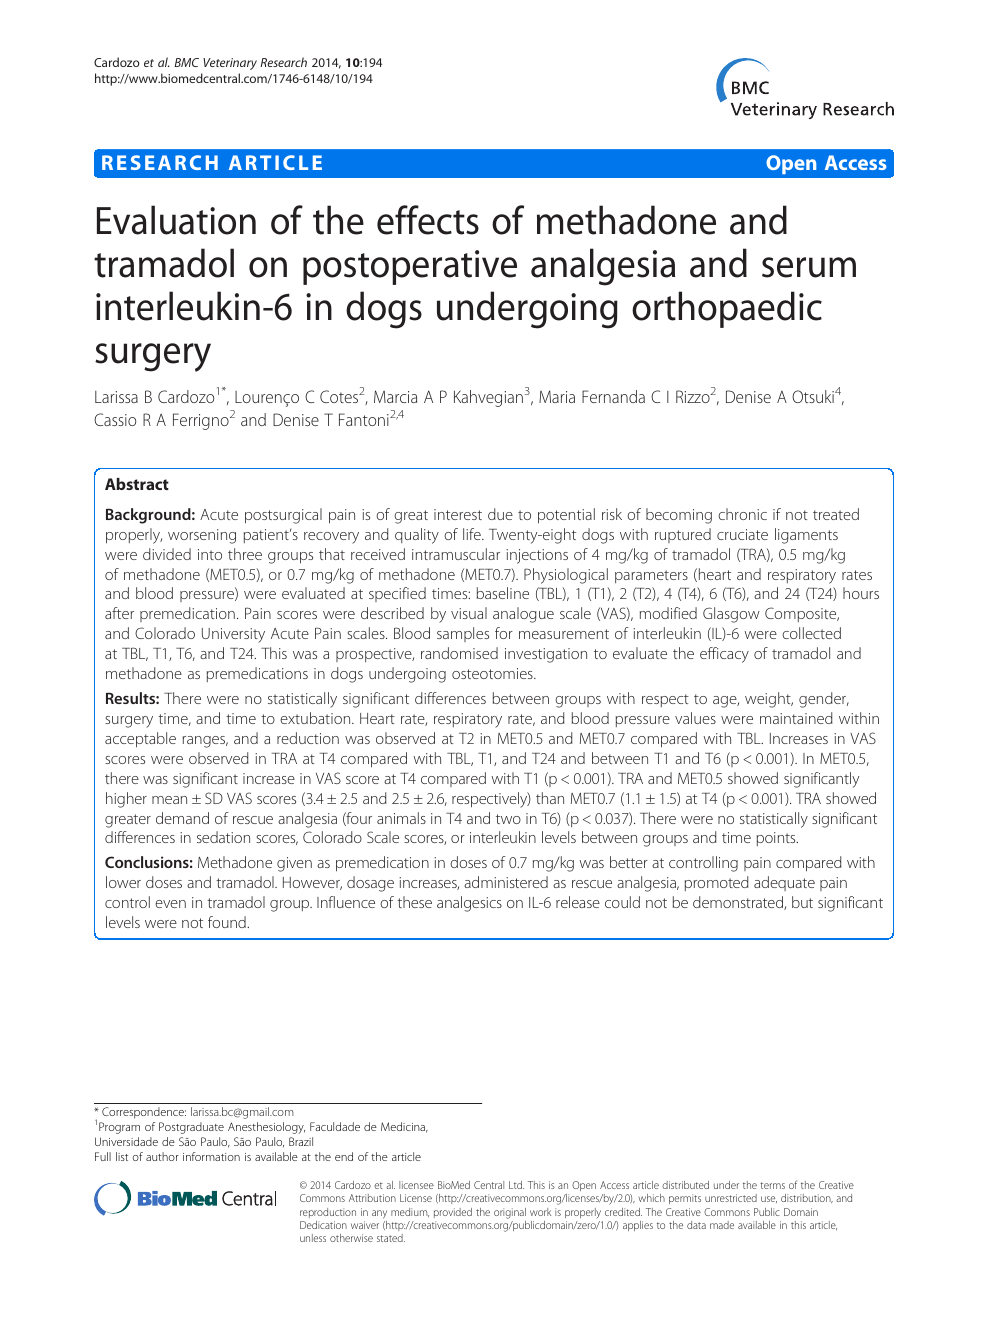 Evaluation Of The Effects Of Methadone And Tramadol On Postoperative Analgesia And Serum Interleukin 6 In Dogs Undergoing Orthopaedic Surgery Topic Of Research Paper In Veterinary Science Download Scholarly Article Pdf And